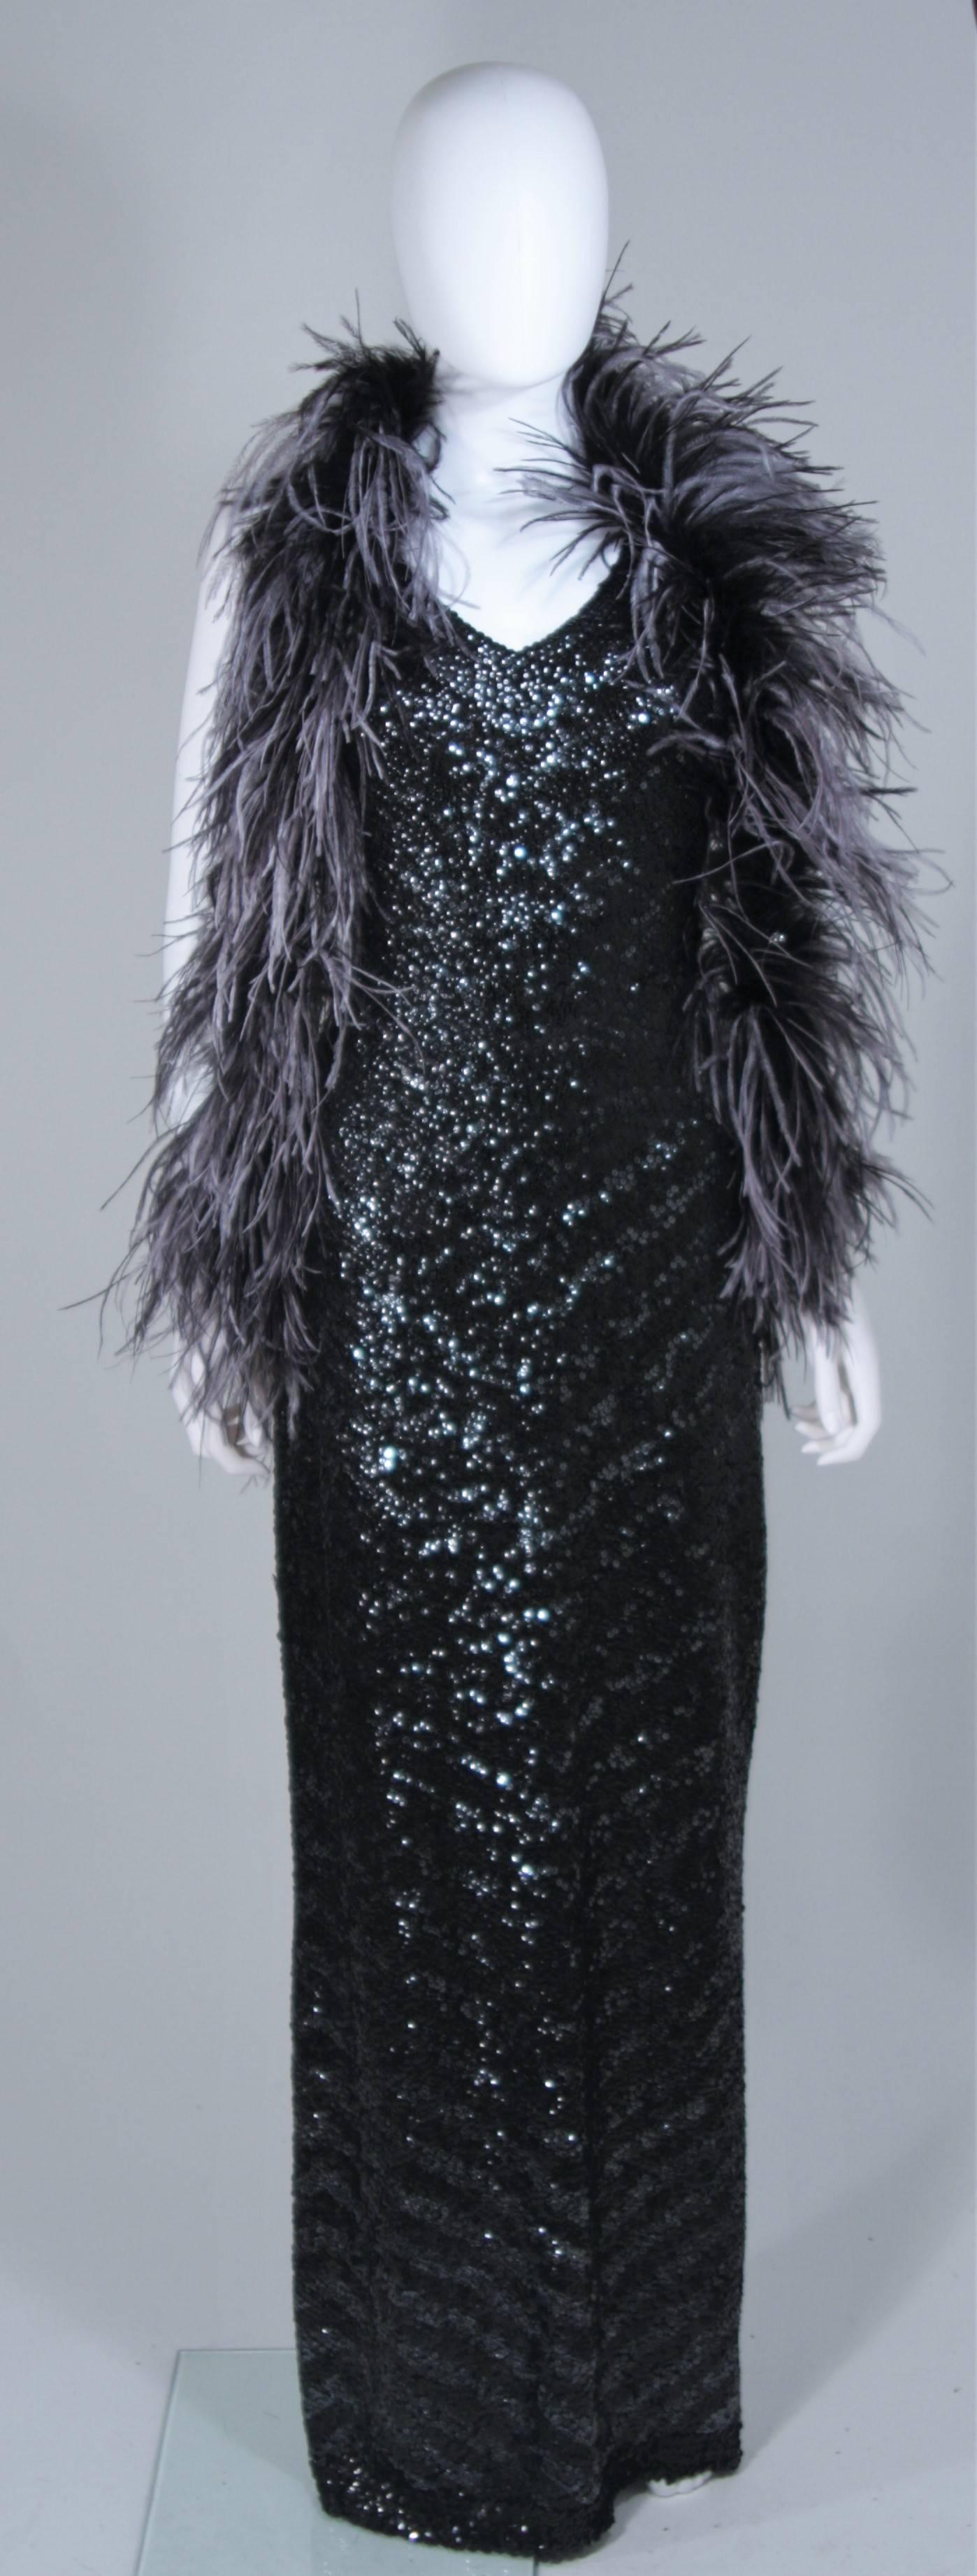 Black ELIZABETH MASON COUTURE Ostrich Wrap with Rhinestone Closure Made to Order For Sale